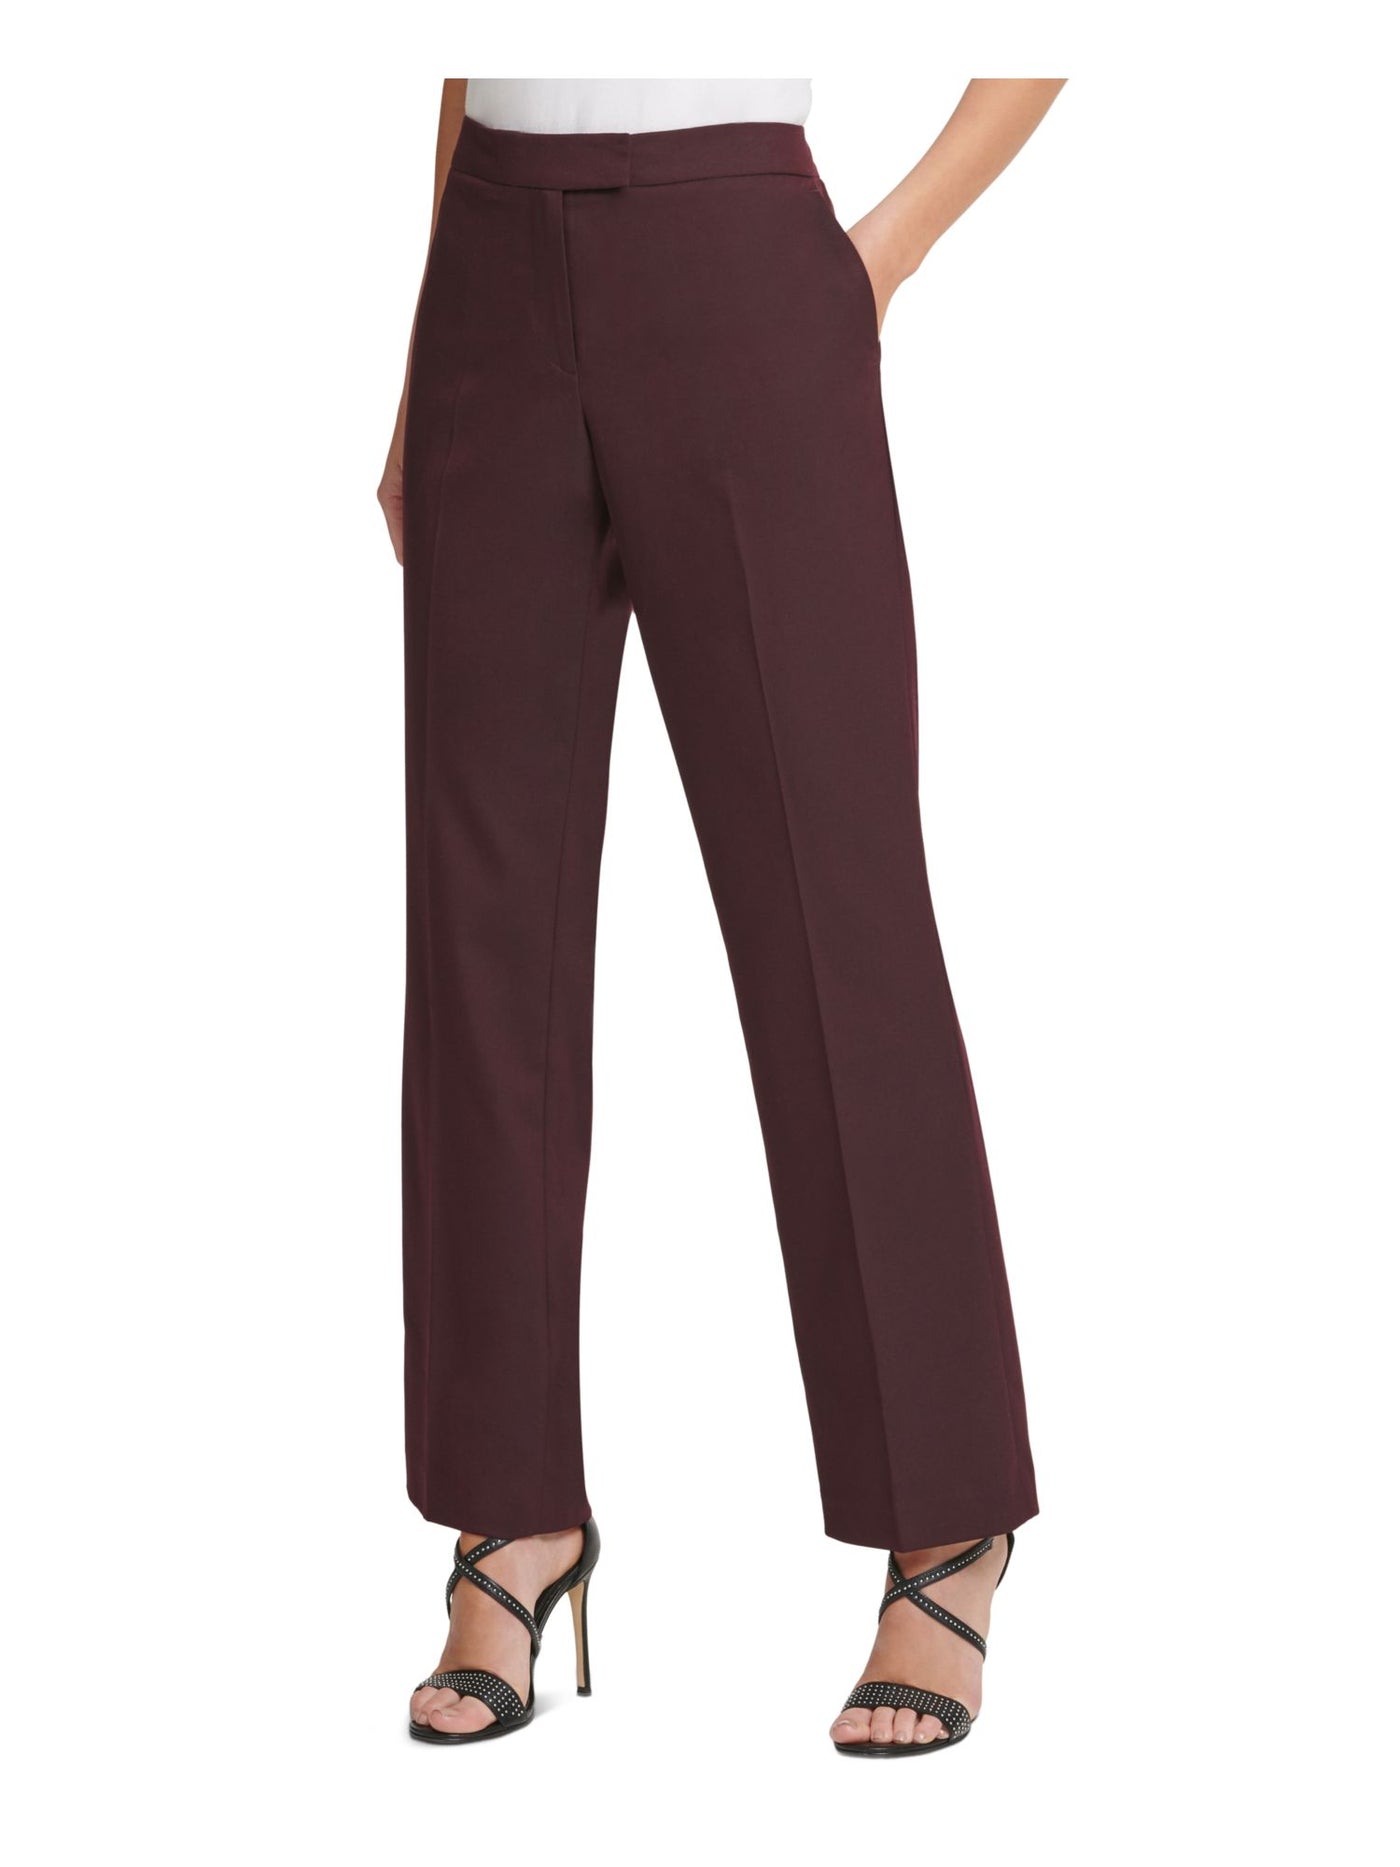 DKNY Womens Maroon Pocketed Zippered Wear To Work Boot Cut Pants Petites 6P